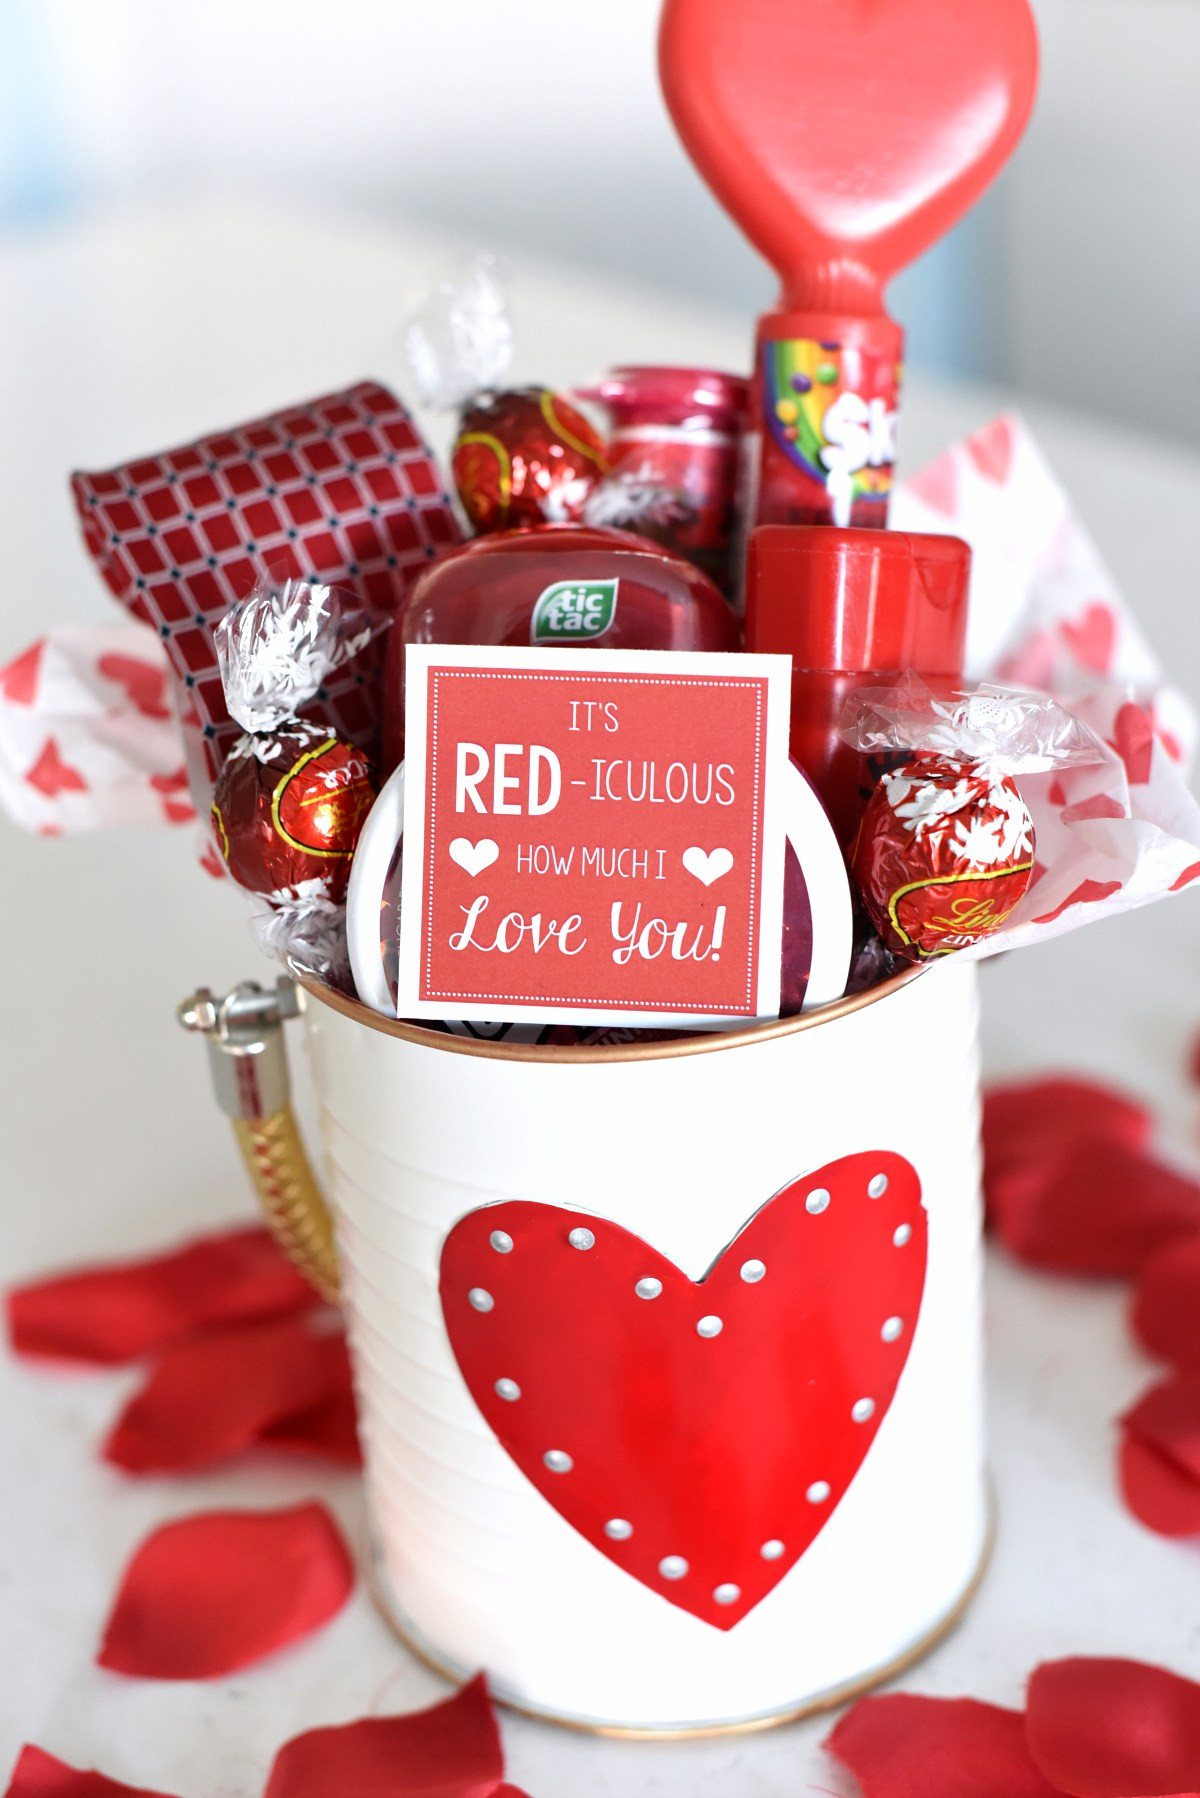 Funny Valentines Day Gift Ideas
 25 DIY Valentine s Day Gift Ideas Teens Will Love